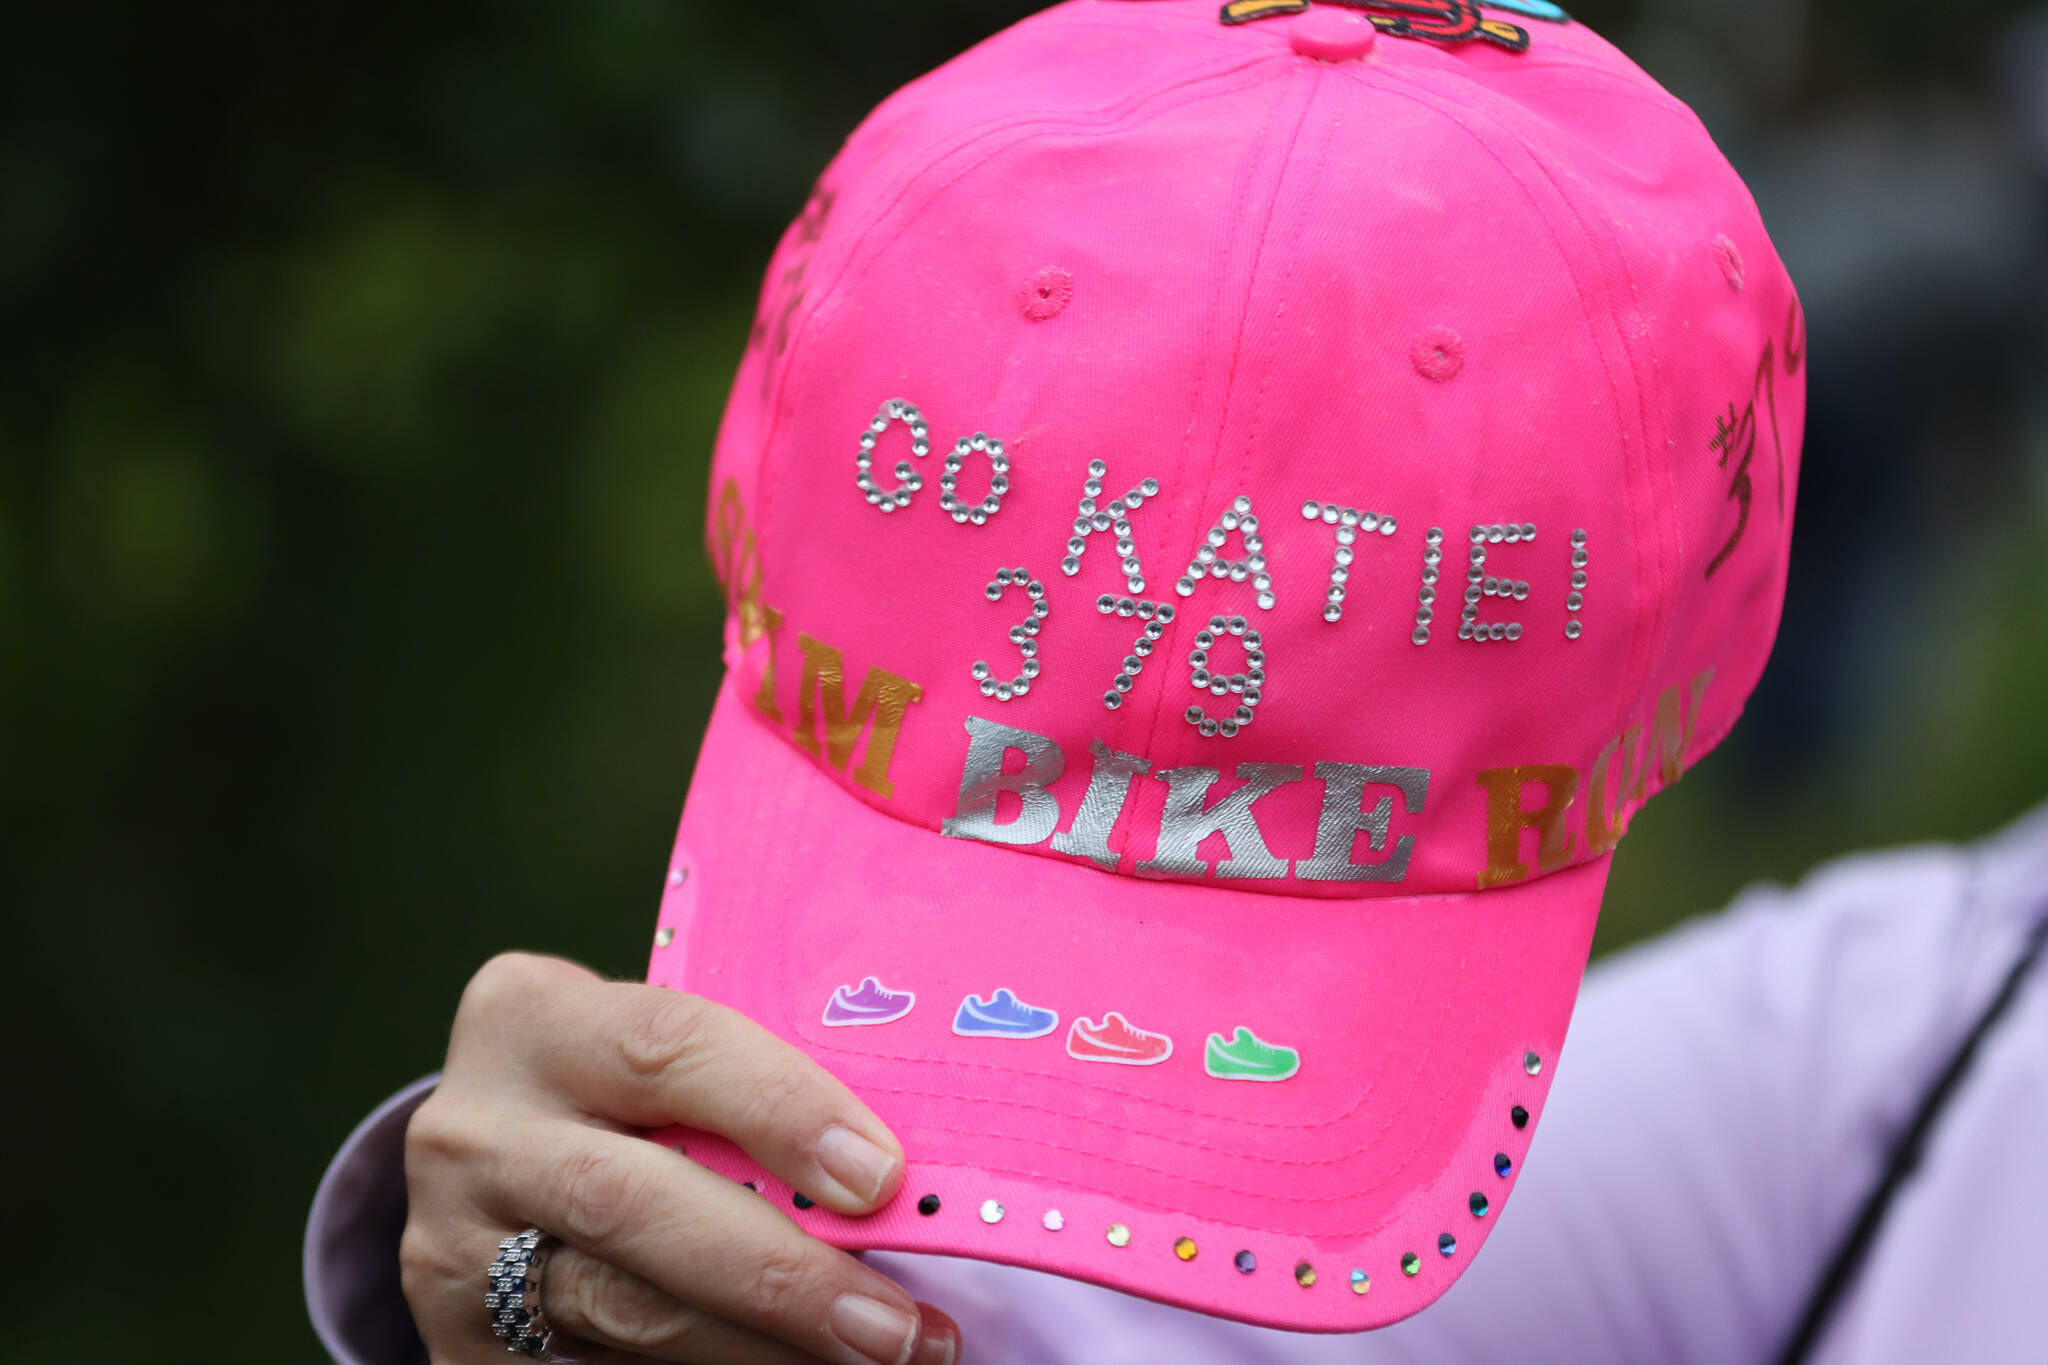 Claire Dysarczyk holds up a custom pink cap made to support Katie Zlotecki. Dysarczyk and several others traveled to Juneau from Michigan for the event and came with flamboyant, bedazzled gear. (Ben Hohenstatt / Juneau Empire)